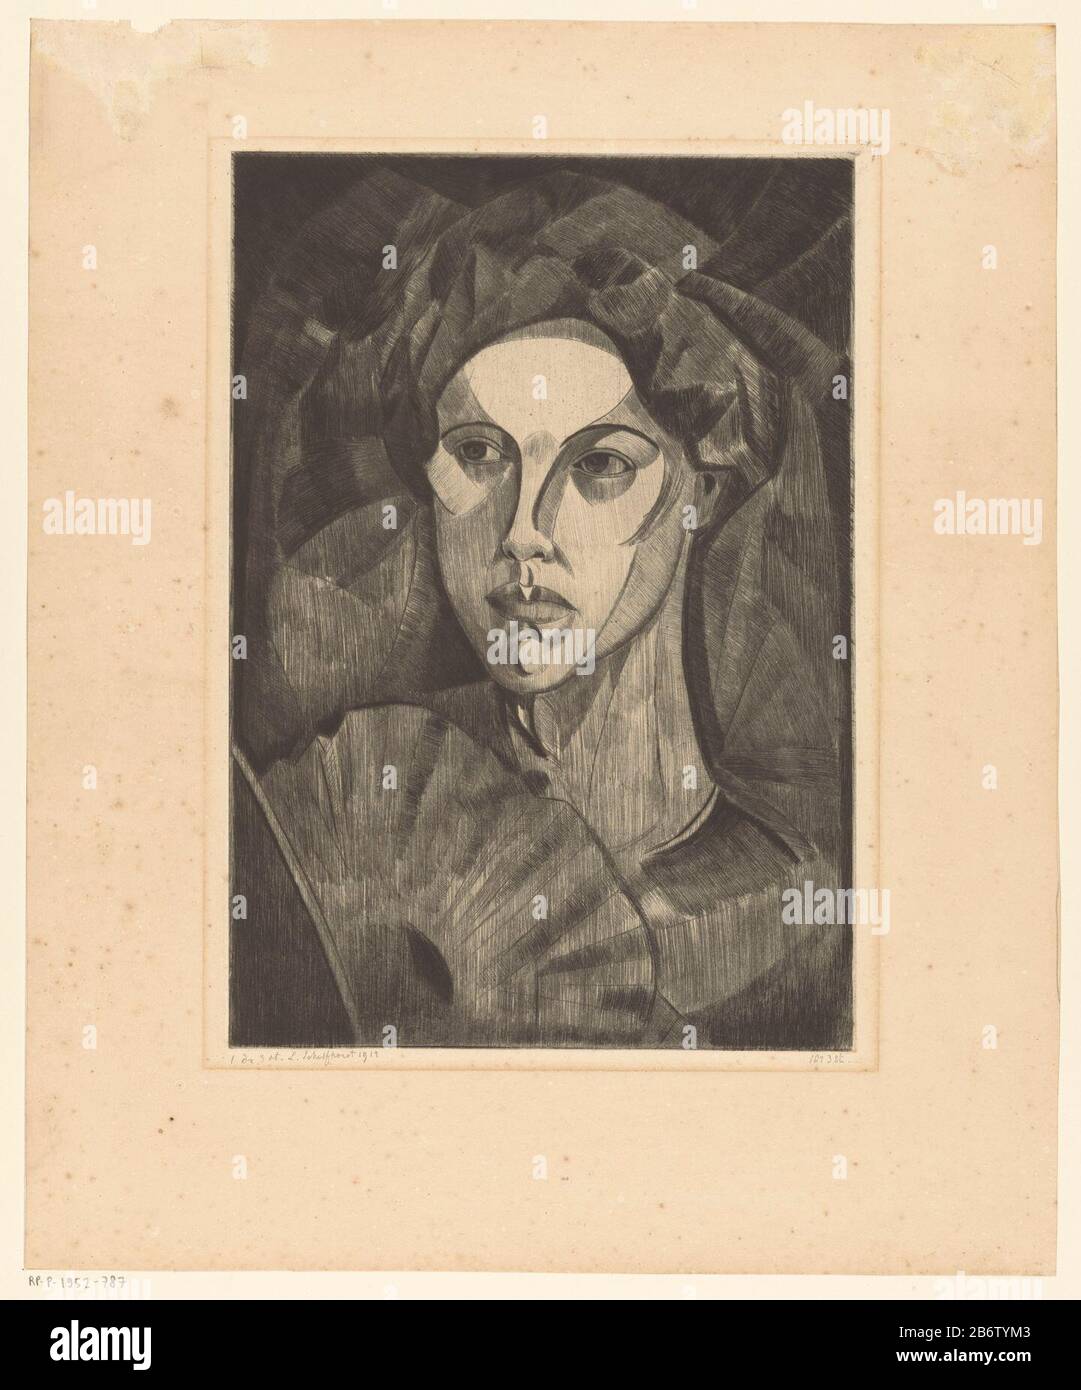 a woman with a waaier. Manufacturer : printmaker Lodewijk Schelfhout (personally signed) printer: DelâtrePlaats manufacture: Paris Date: 1912 Physical features: drypoint on zinc material: paper Technique: drypoint dimensions: plate edge: h 333 mm b × 232 mm Subject: head (human) - AA - female human rights and figurefan Stock Photo